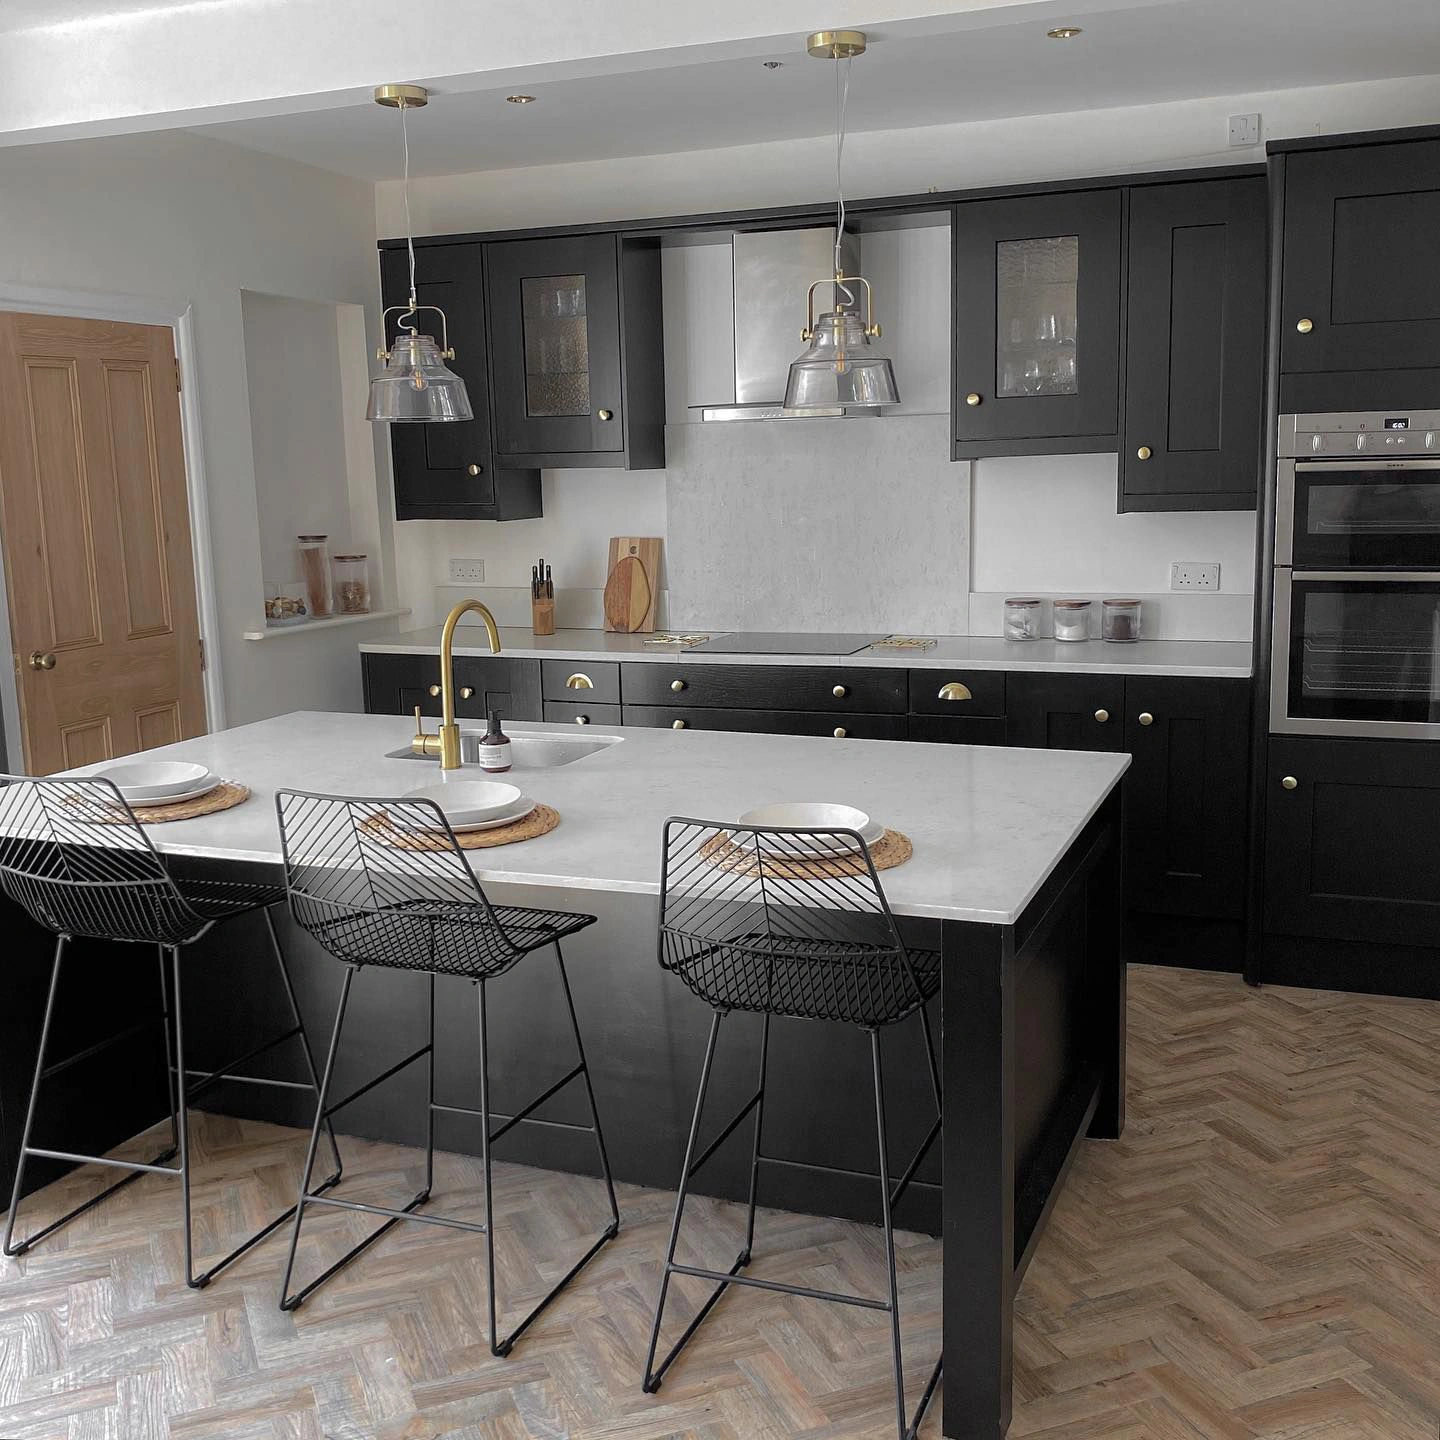 Farrow and Ball Pitch Black 256 kitchen cabinets